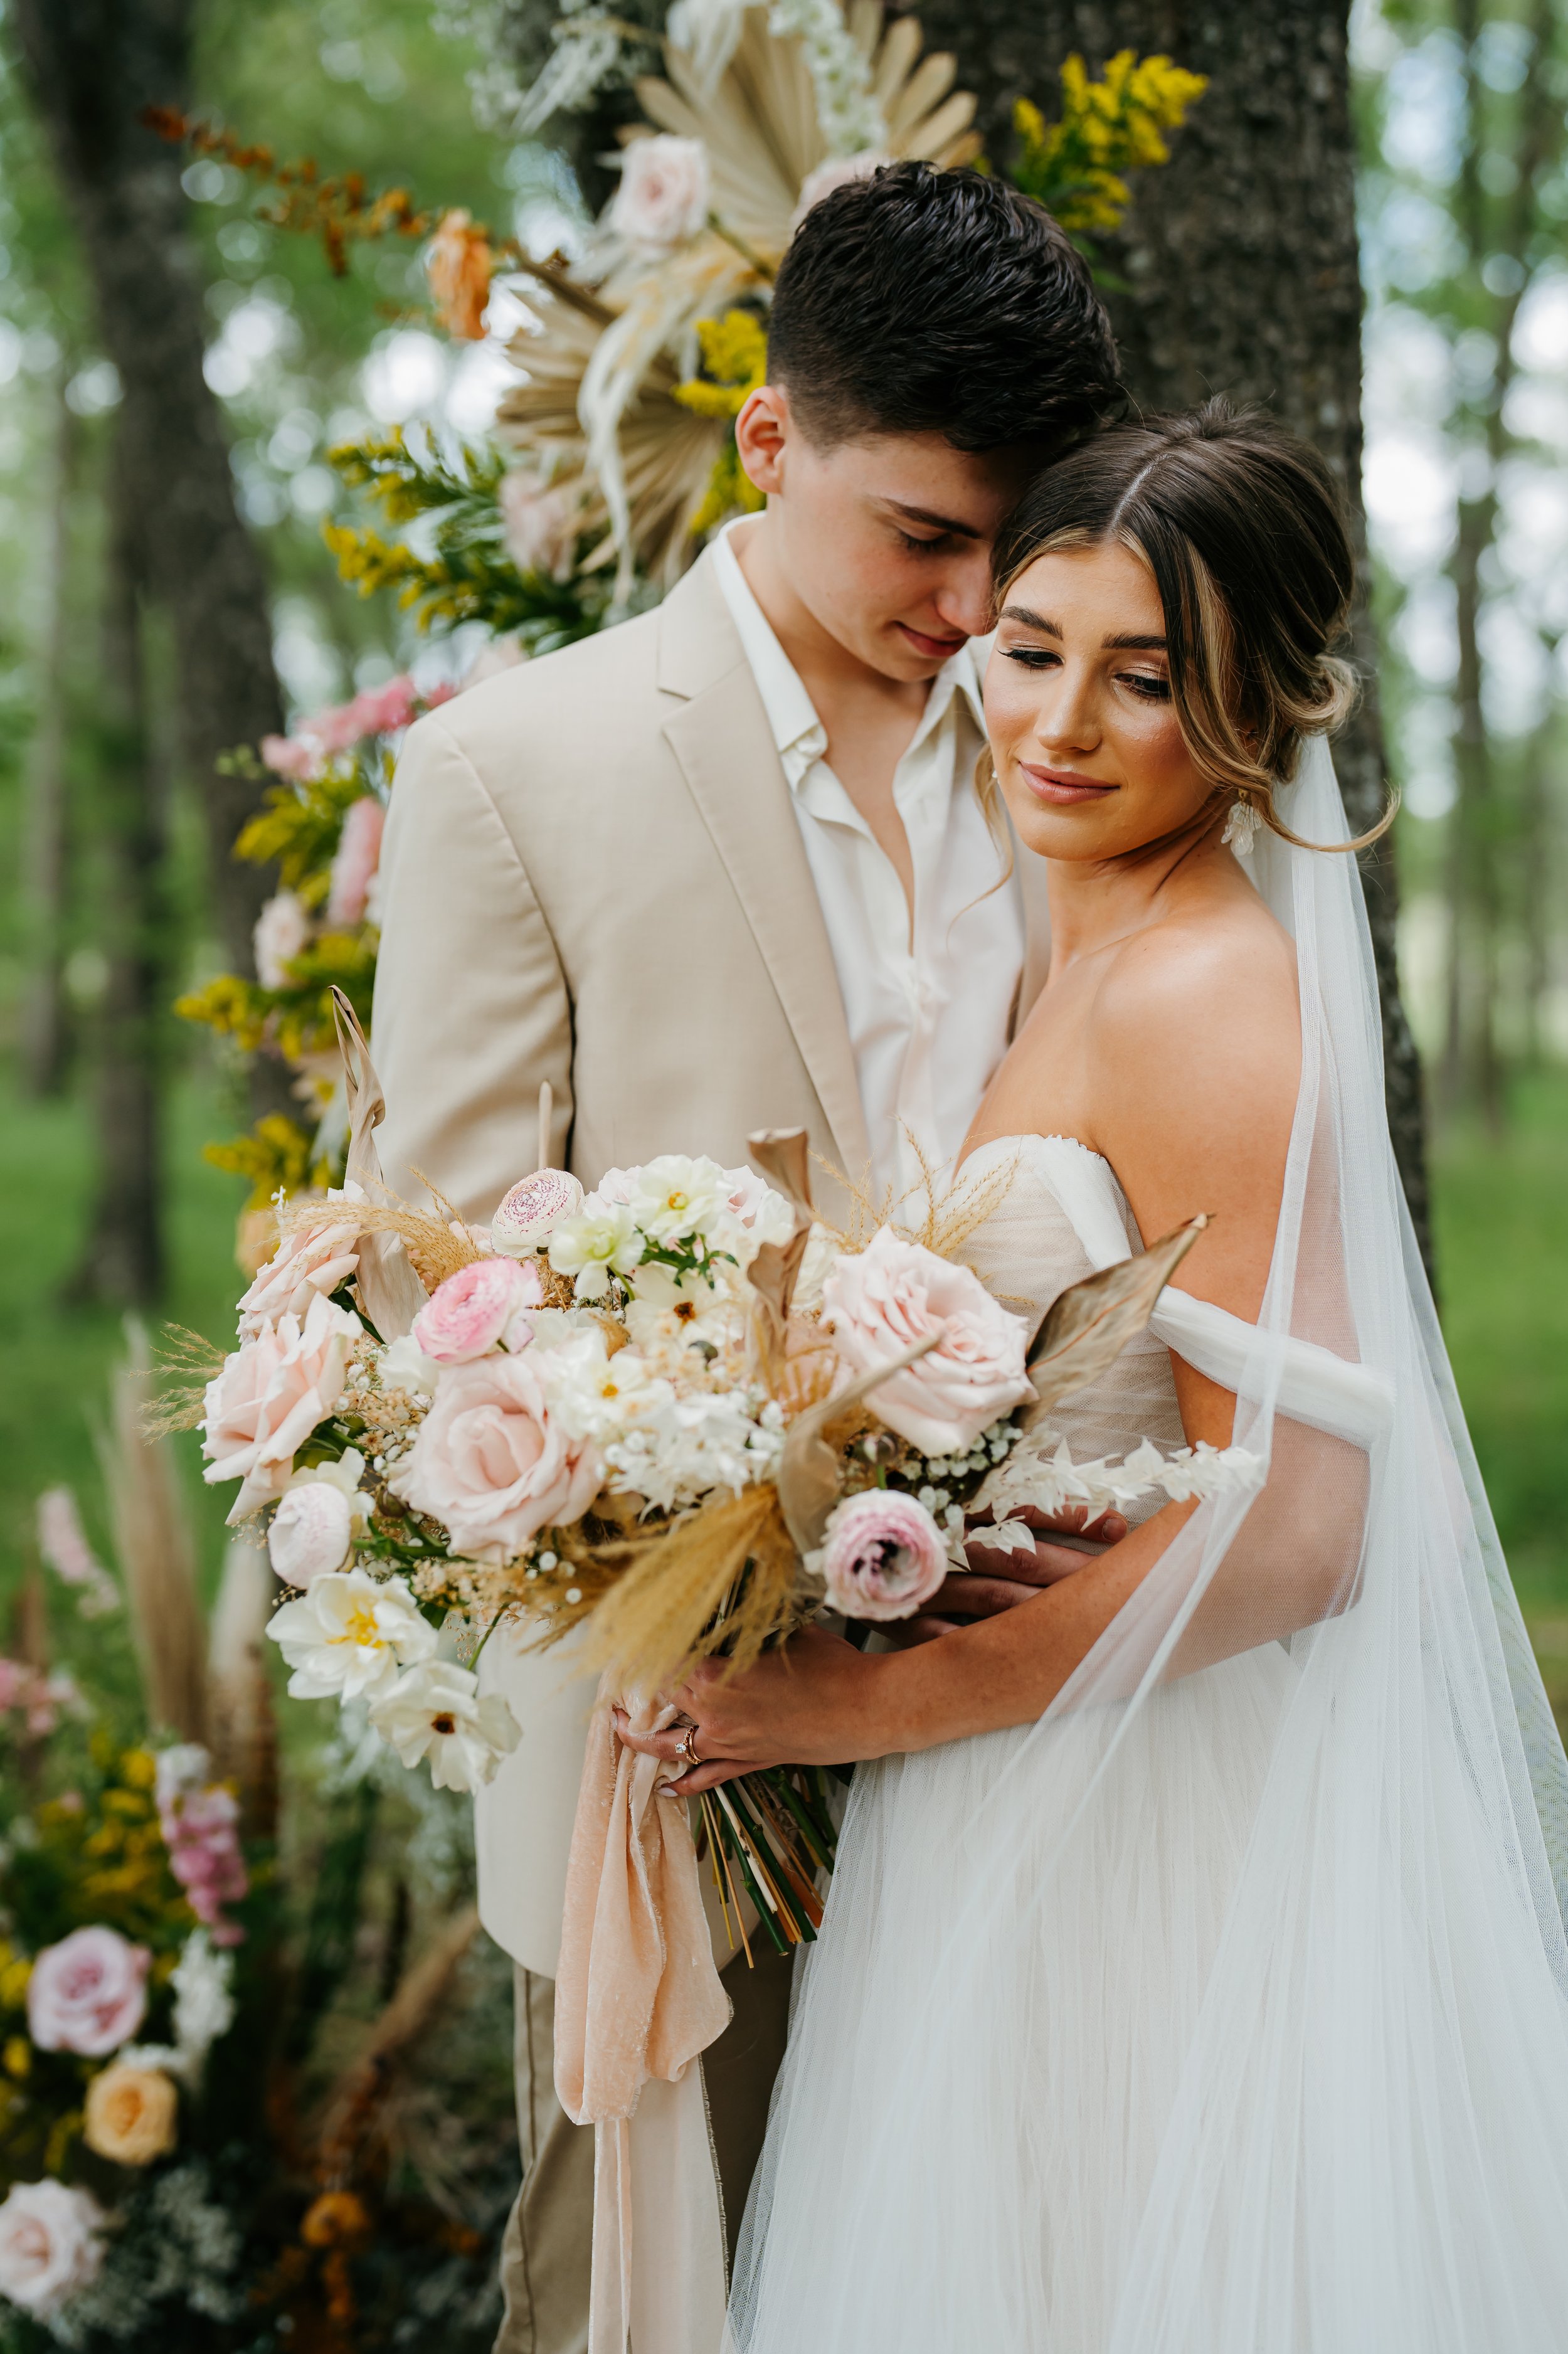 watters wedding dress in a forest styled wedding